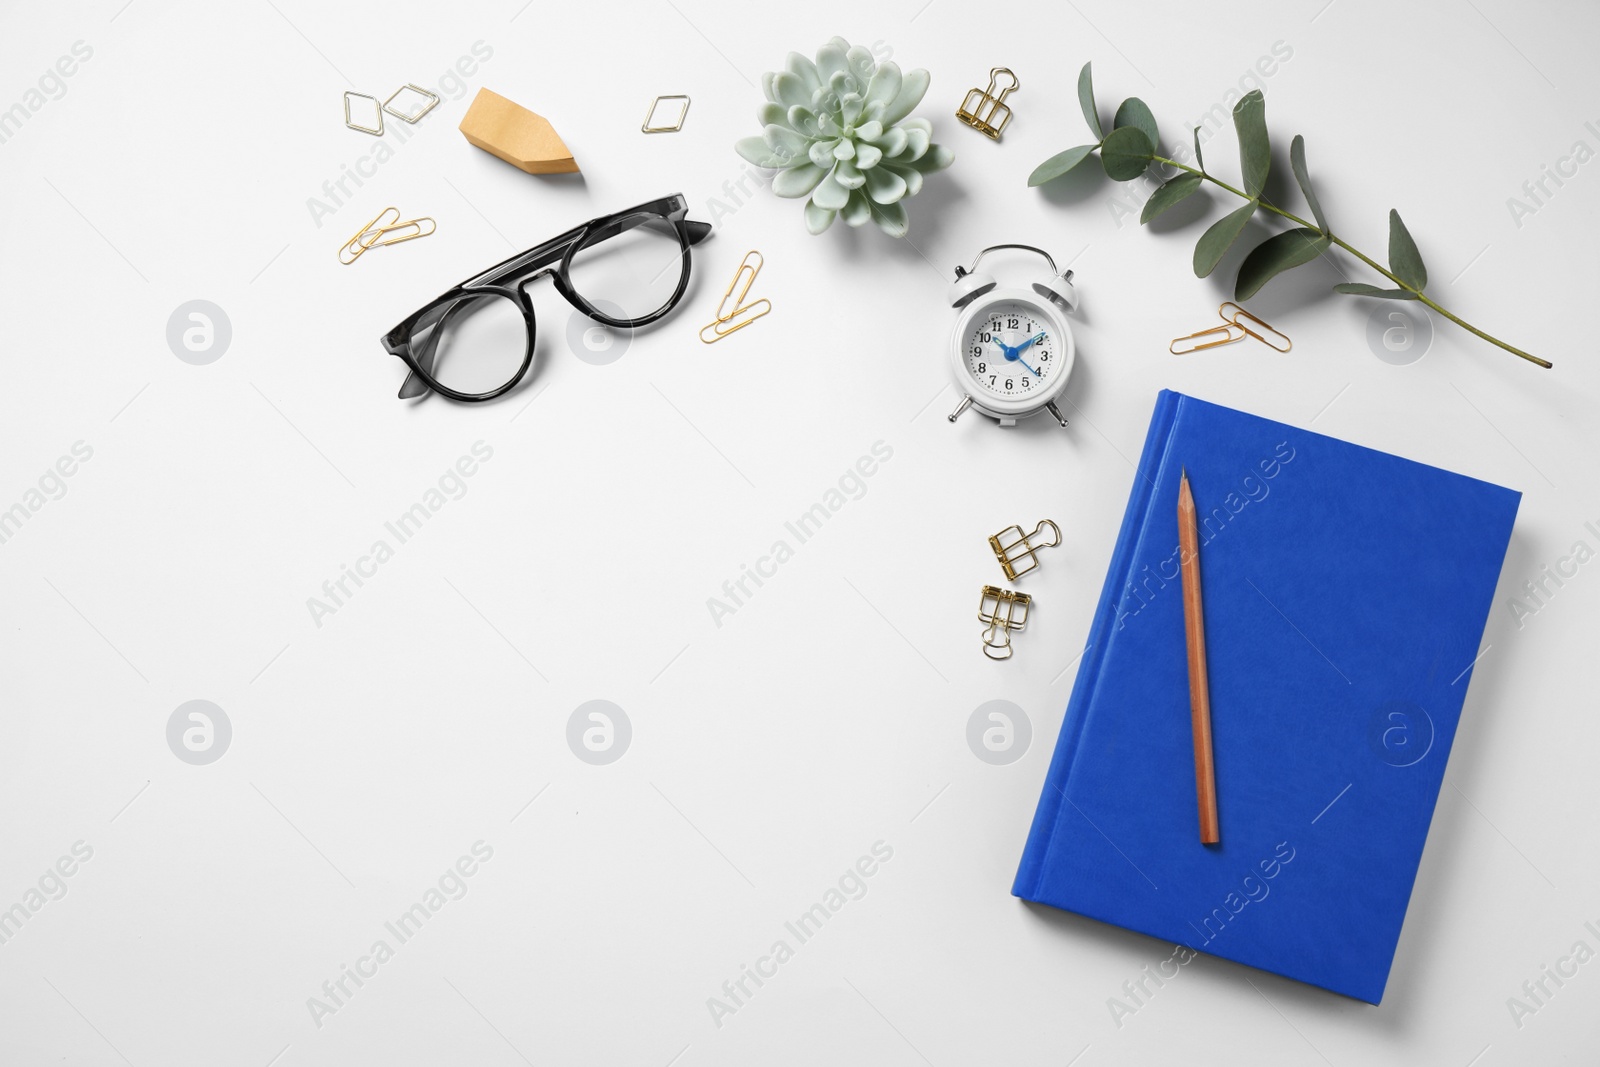 Photo of Glasses, alarm clock, eucalyptus and different stationery on white background, top view. Classic blue - color of the Year 2020